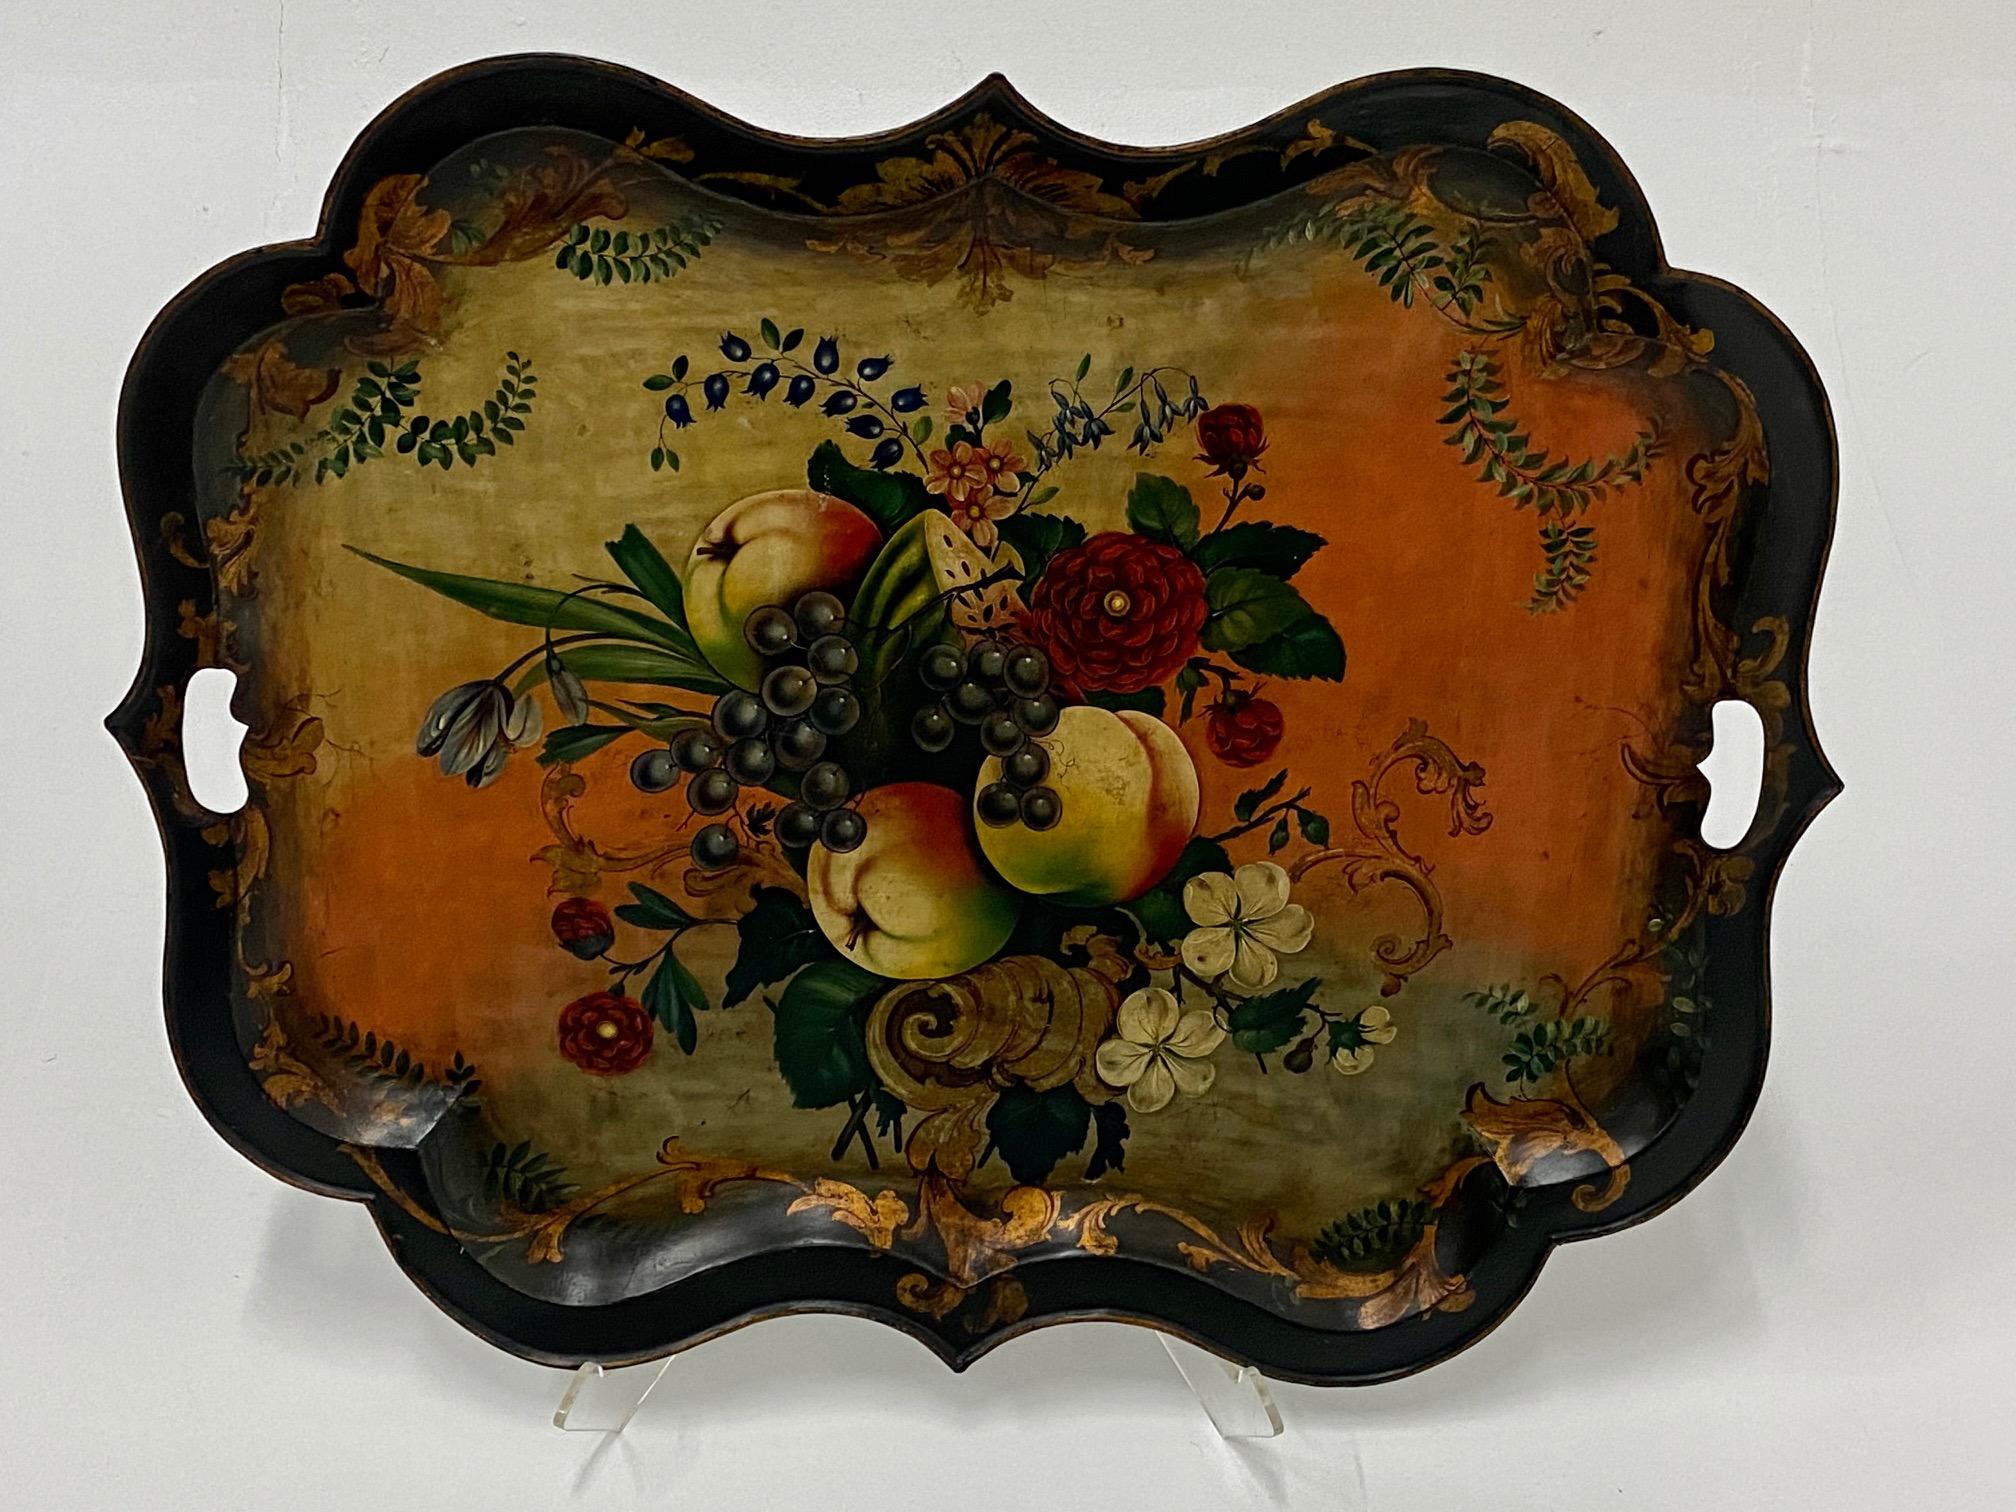 A large and gorgeously decorated antique metal tole tray having scalloped edges and lavishly painted fruit and flowers. Signed illegibly on back.